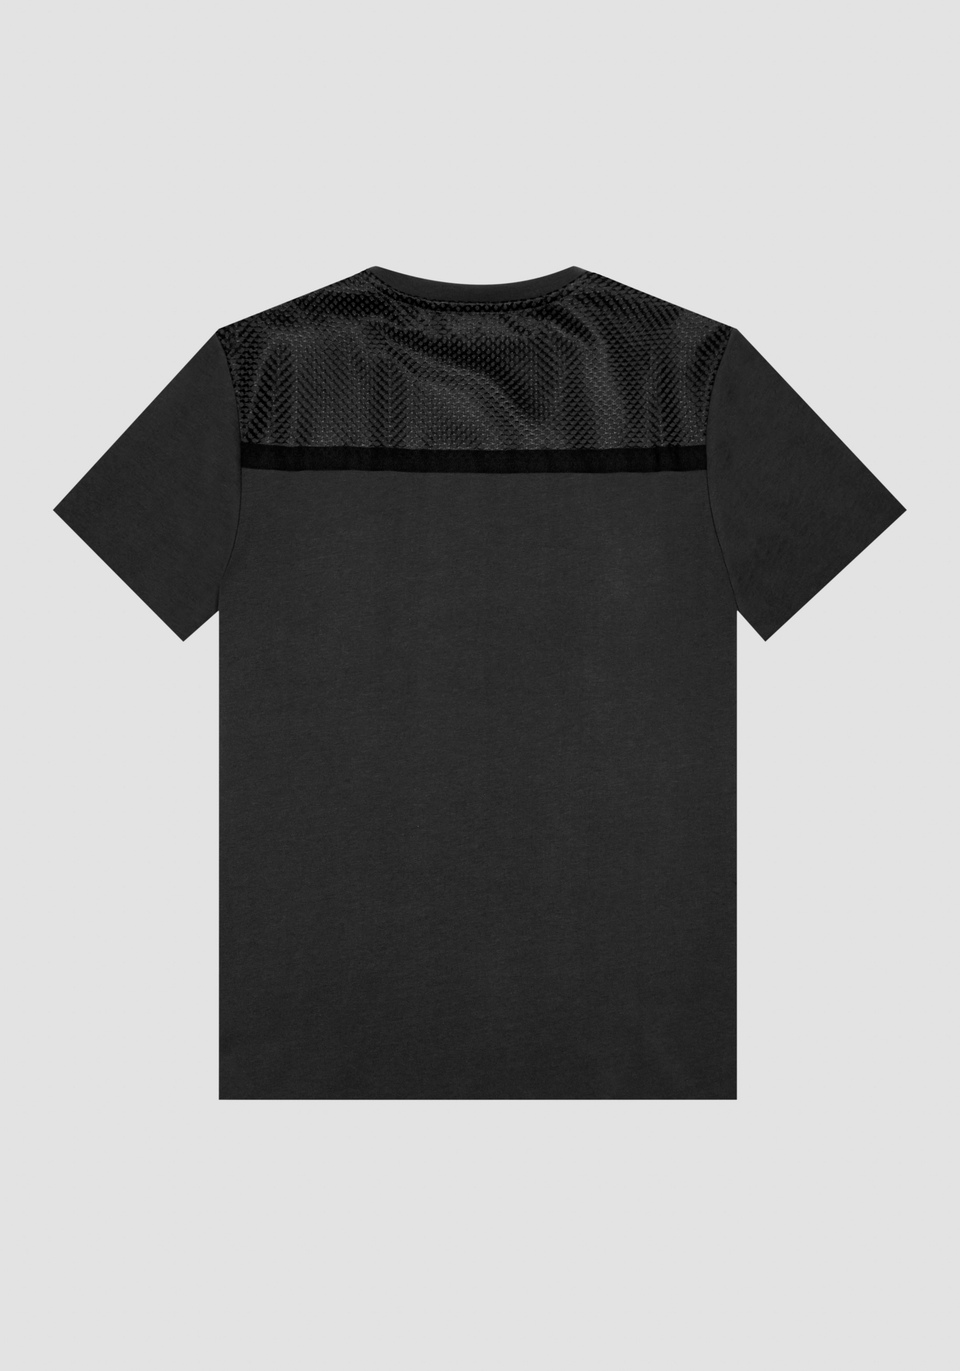 RELAXED FIT T-SHIRT IN COTTON JERSEY WITH CONTRASTING RUBBERISED LOGO PRINT - Antony Morato Online Shop